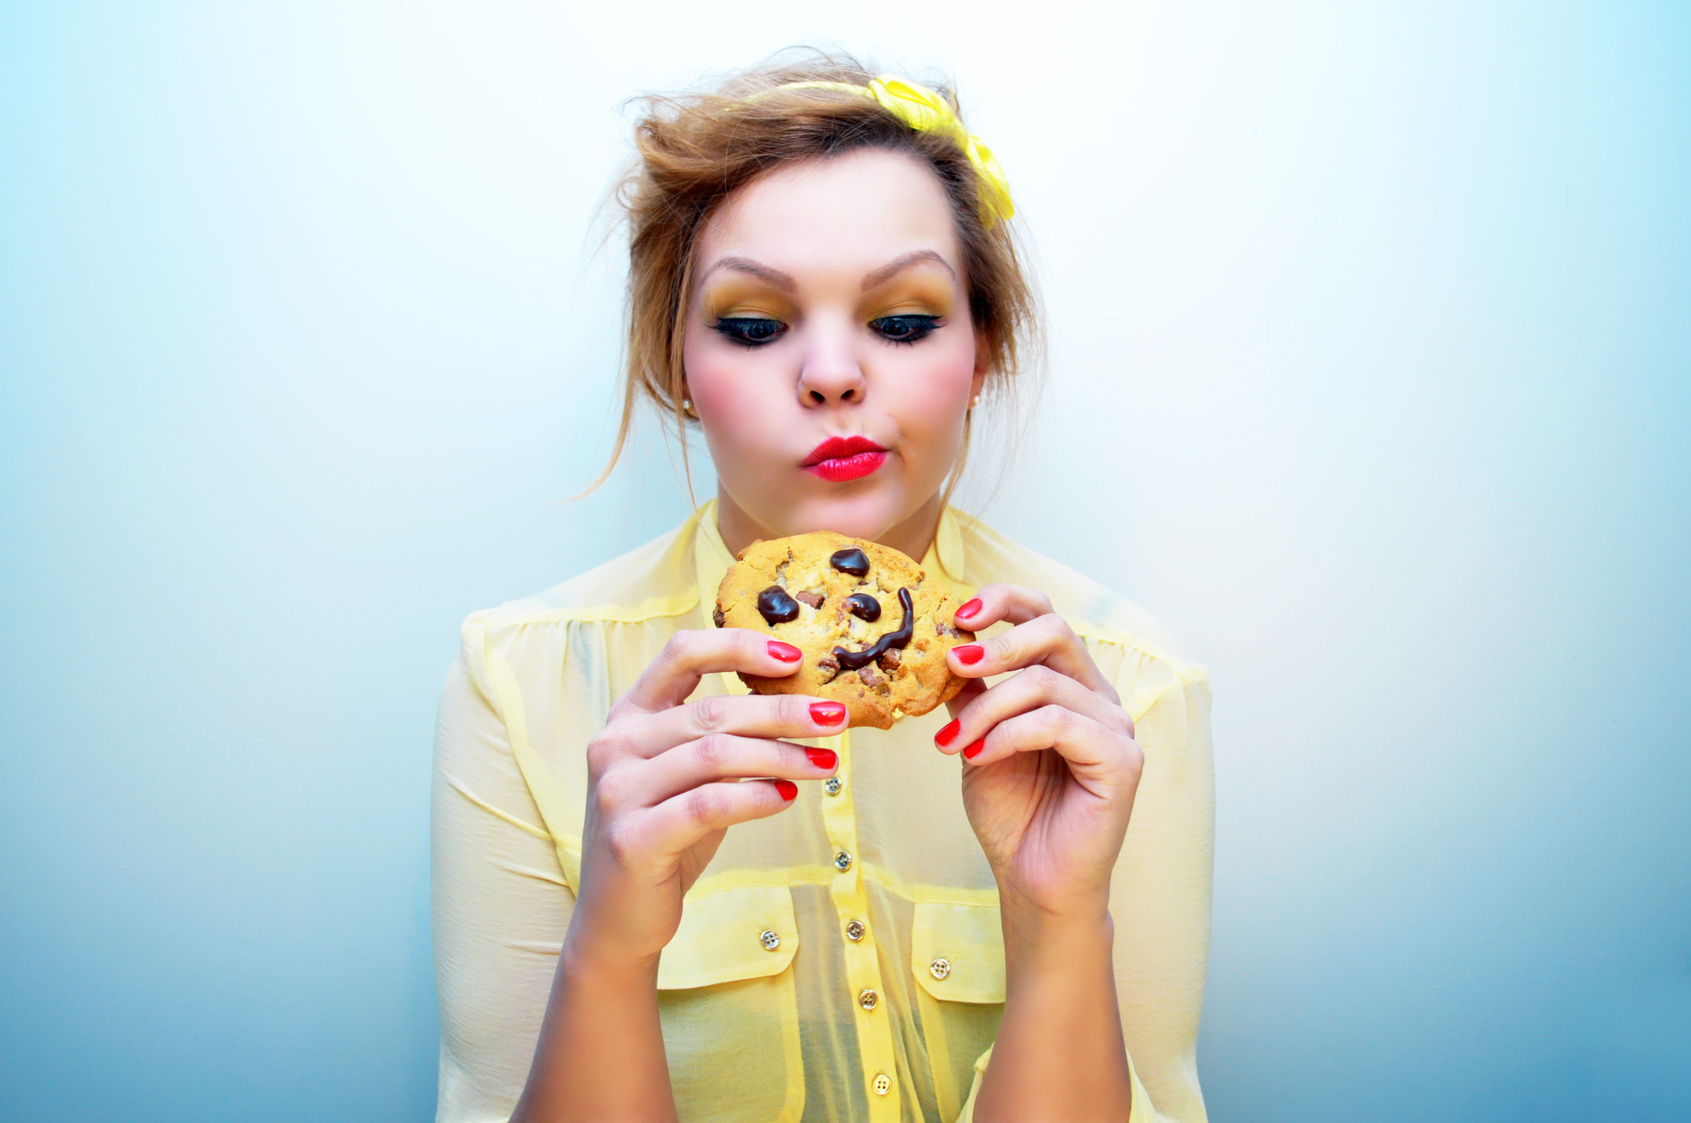 Trendy young woman is eating a smiling chocolate chip cookie.